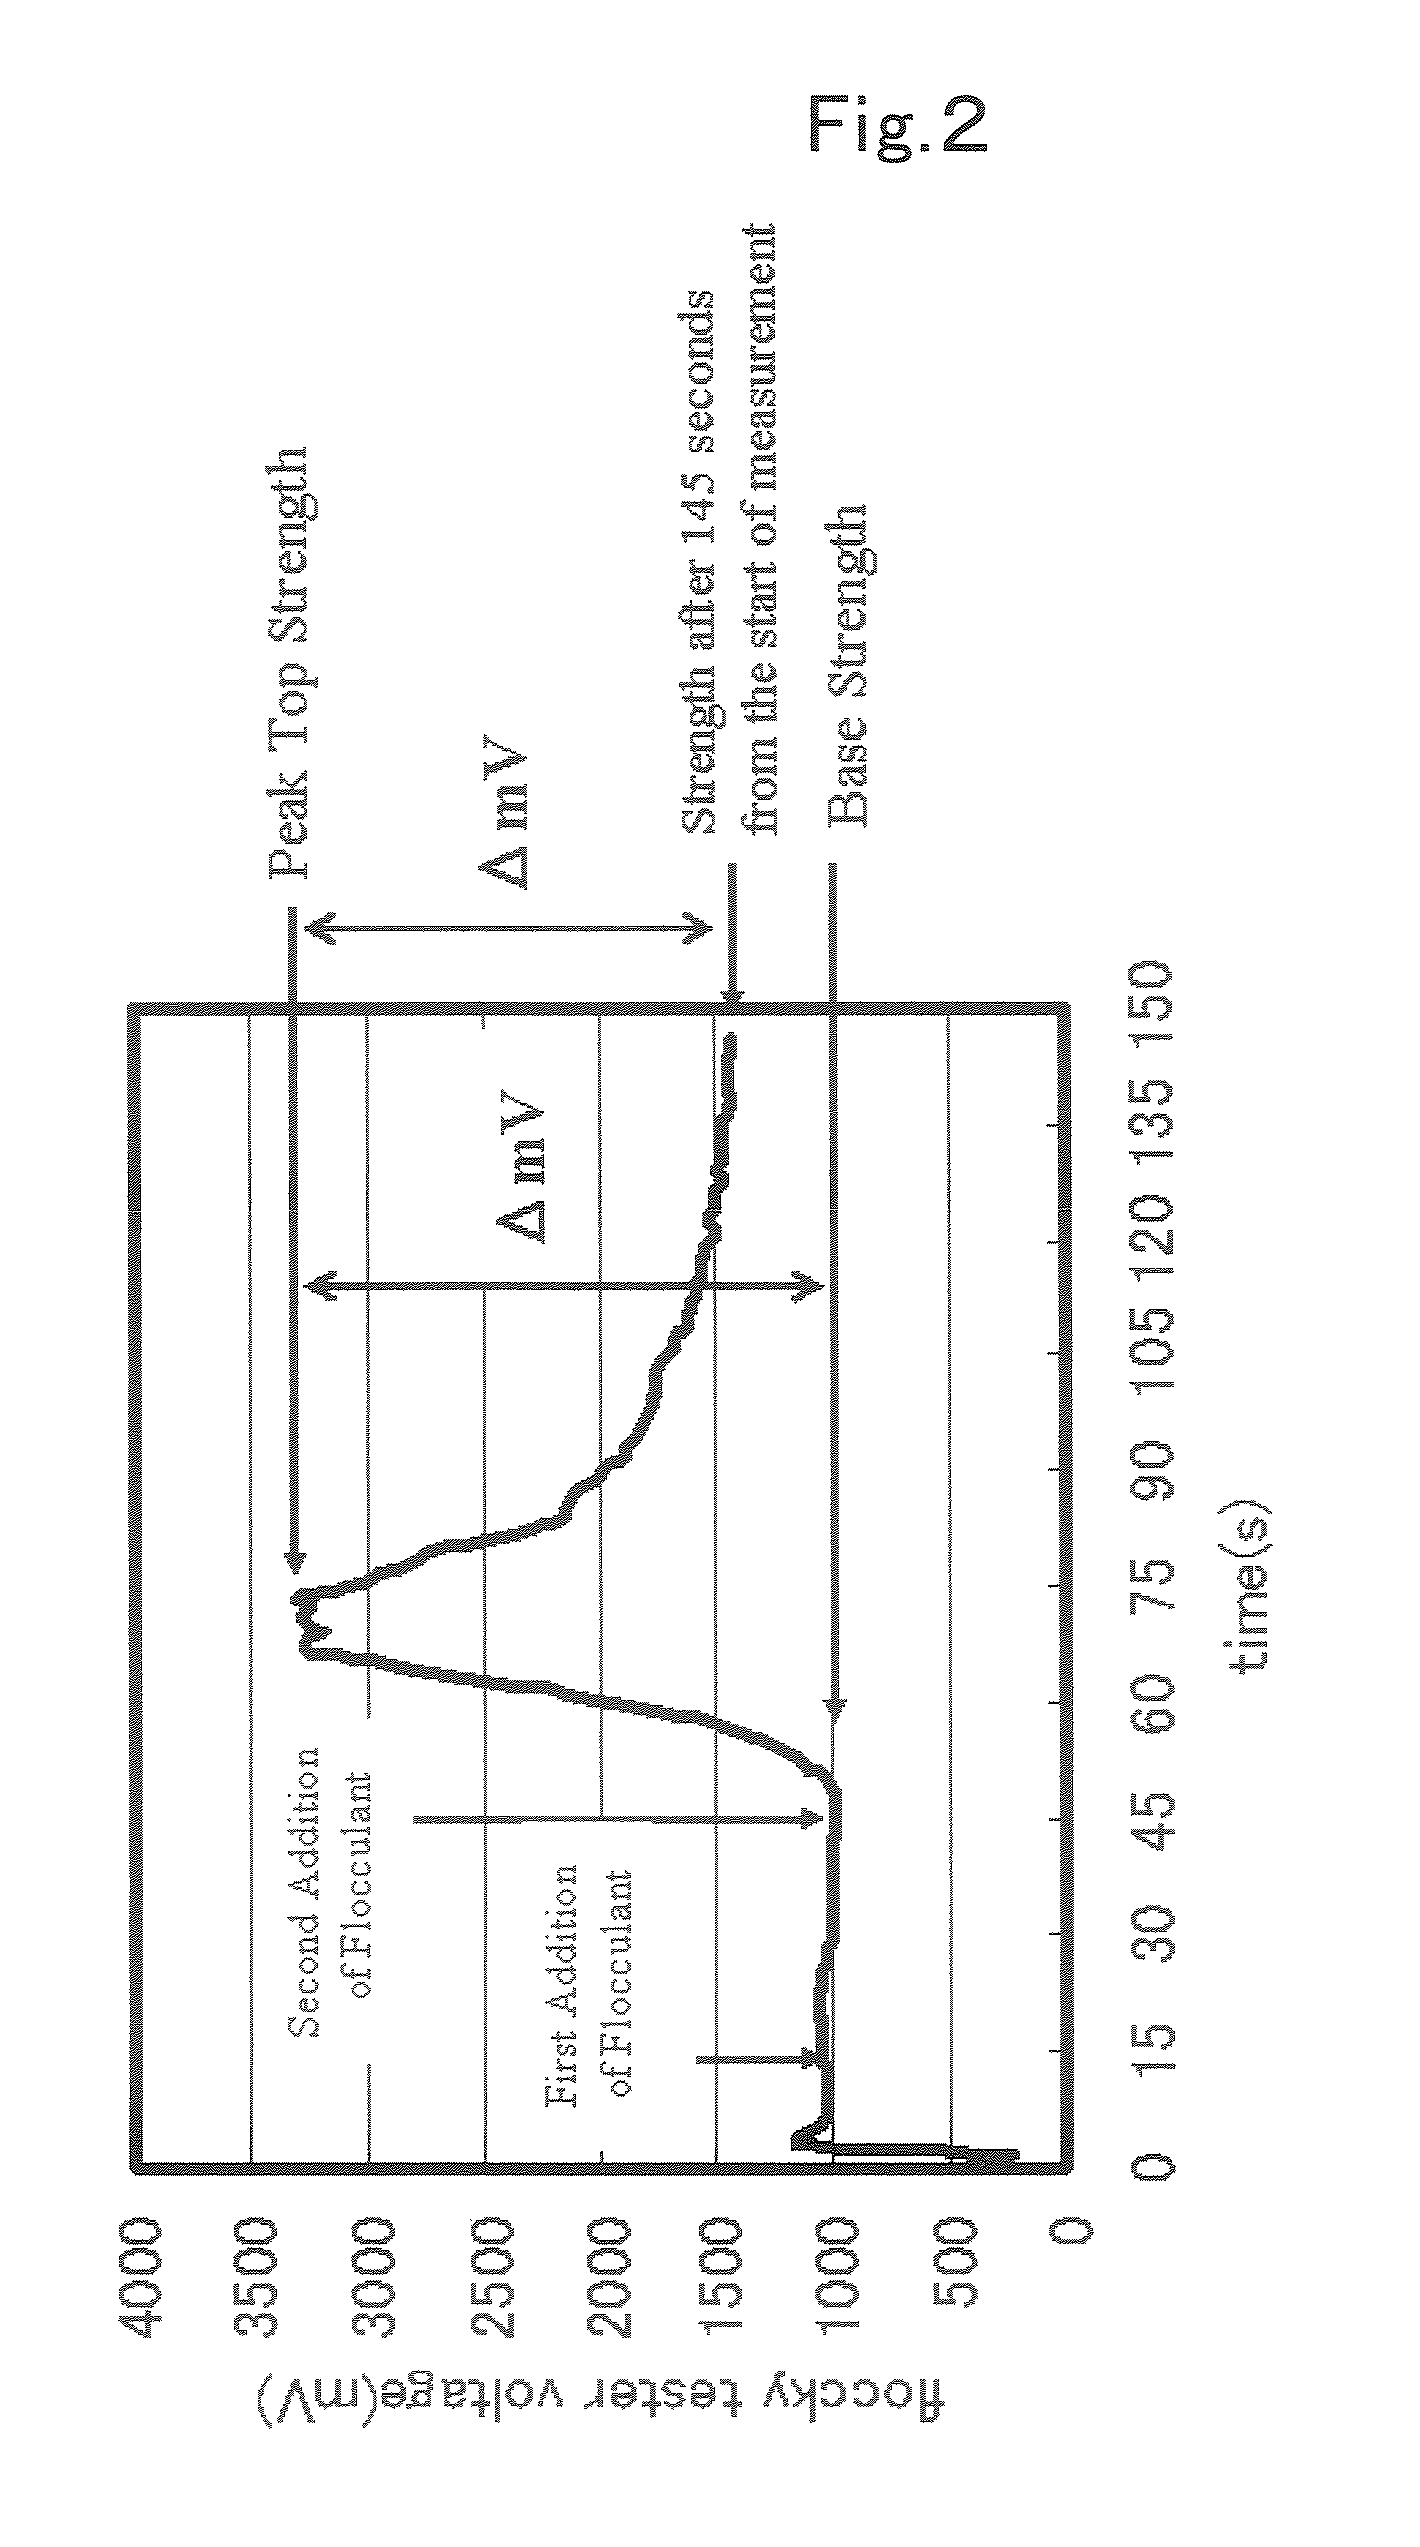 Article Formed Into Sheet, Method for Producing the Same and Exothermic Formed Article